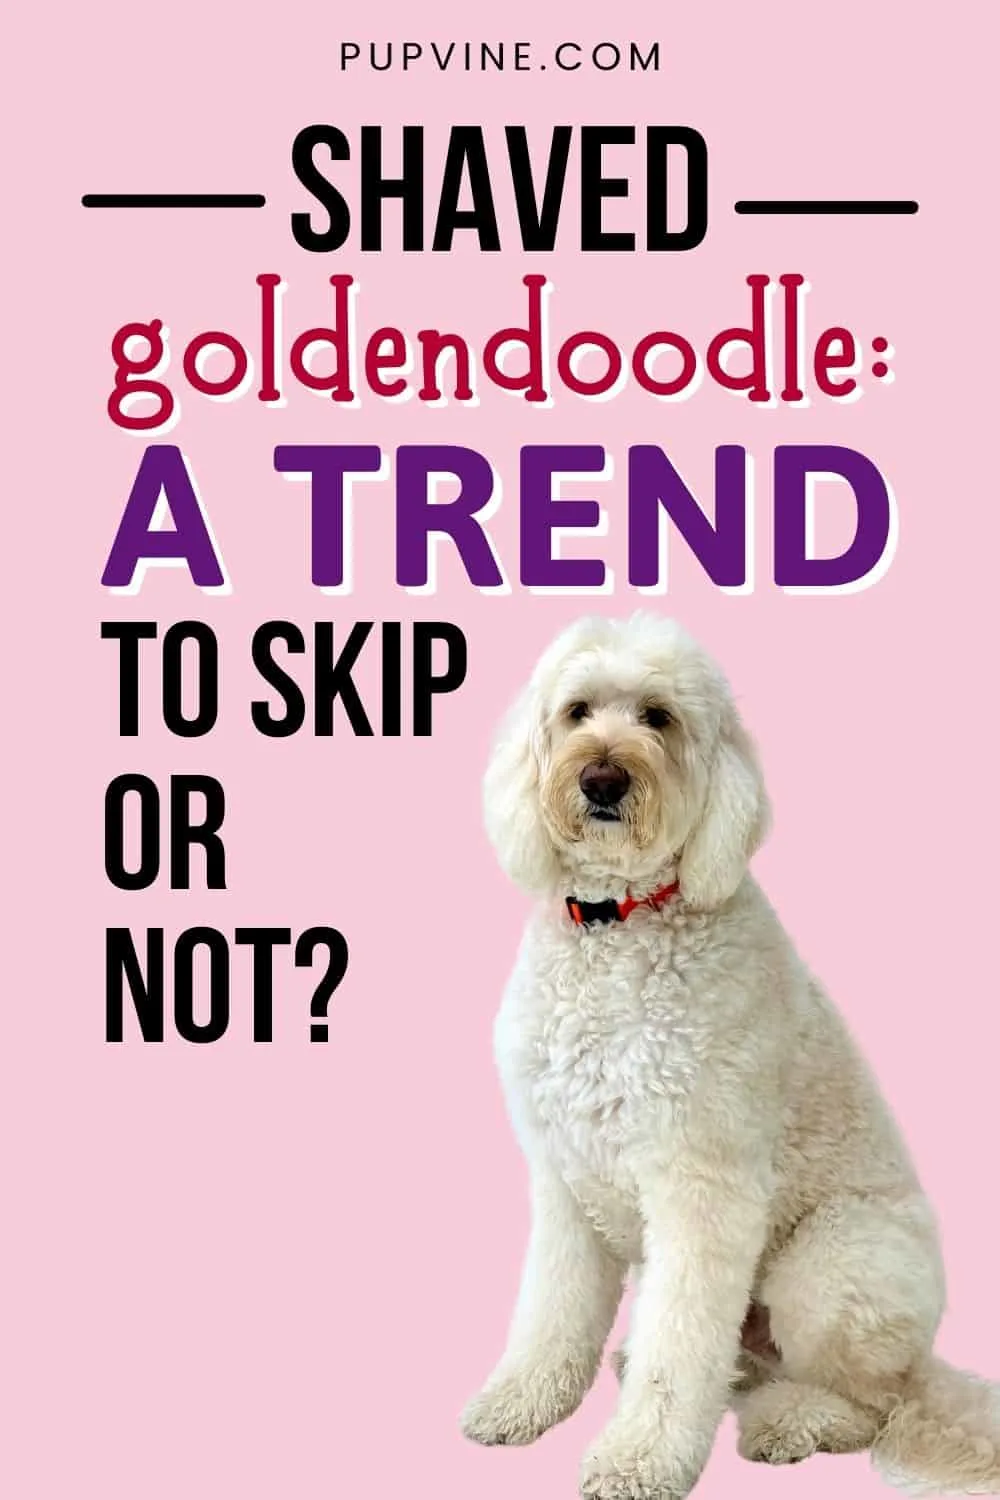 Shaved Goldendoodle: A Trend To Skip Or Not?